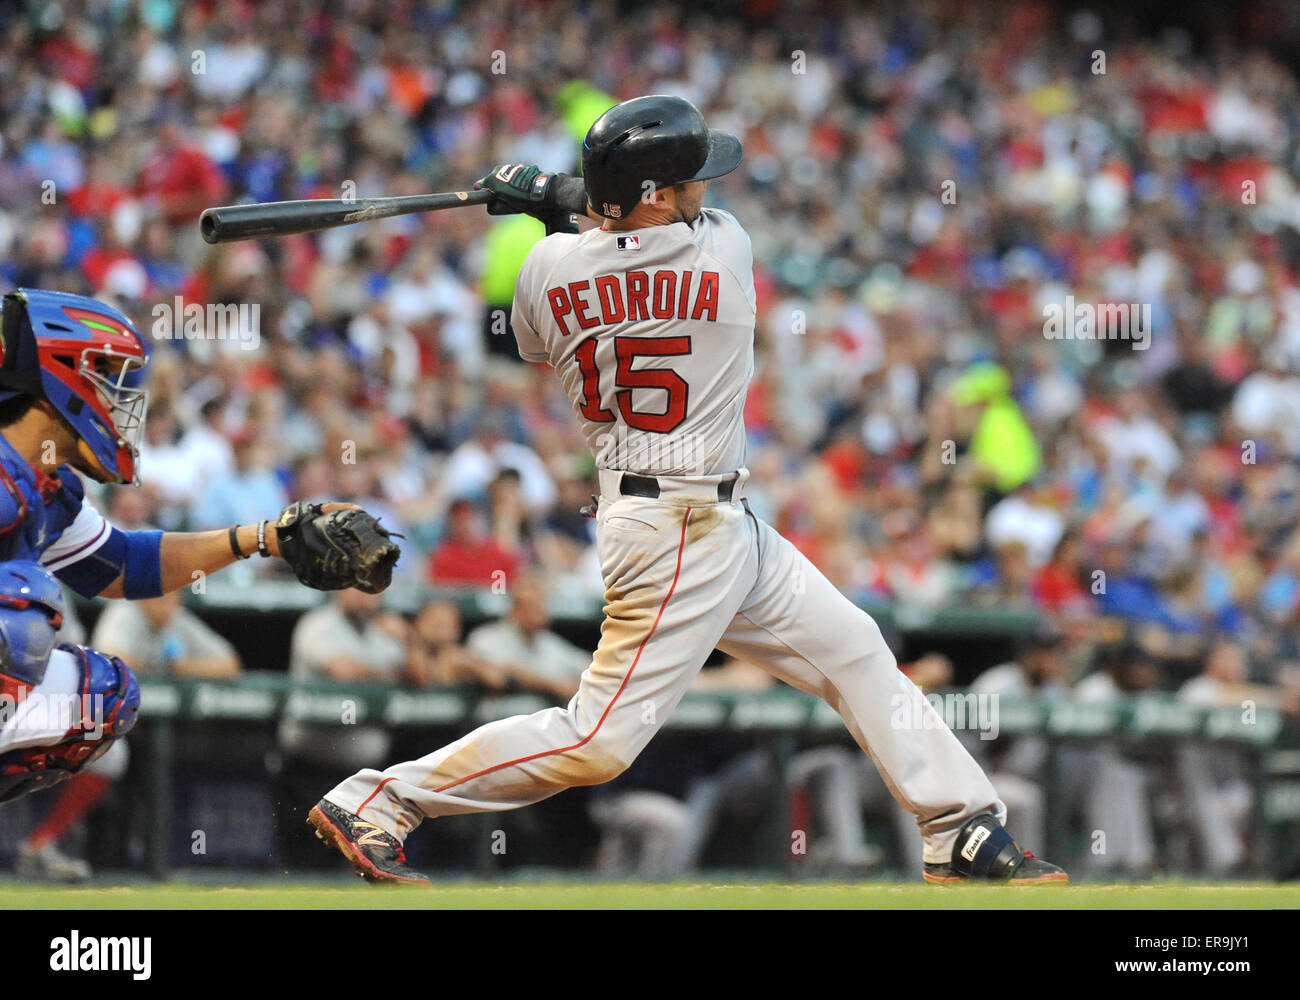 May 28, 2015: Boston Red Sox Second base Dustin Pedroia #15 at the